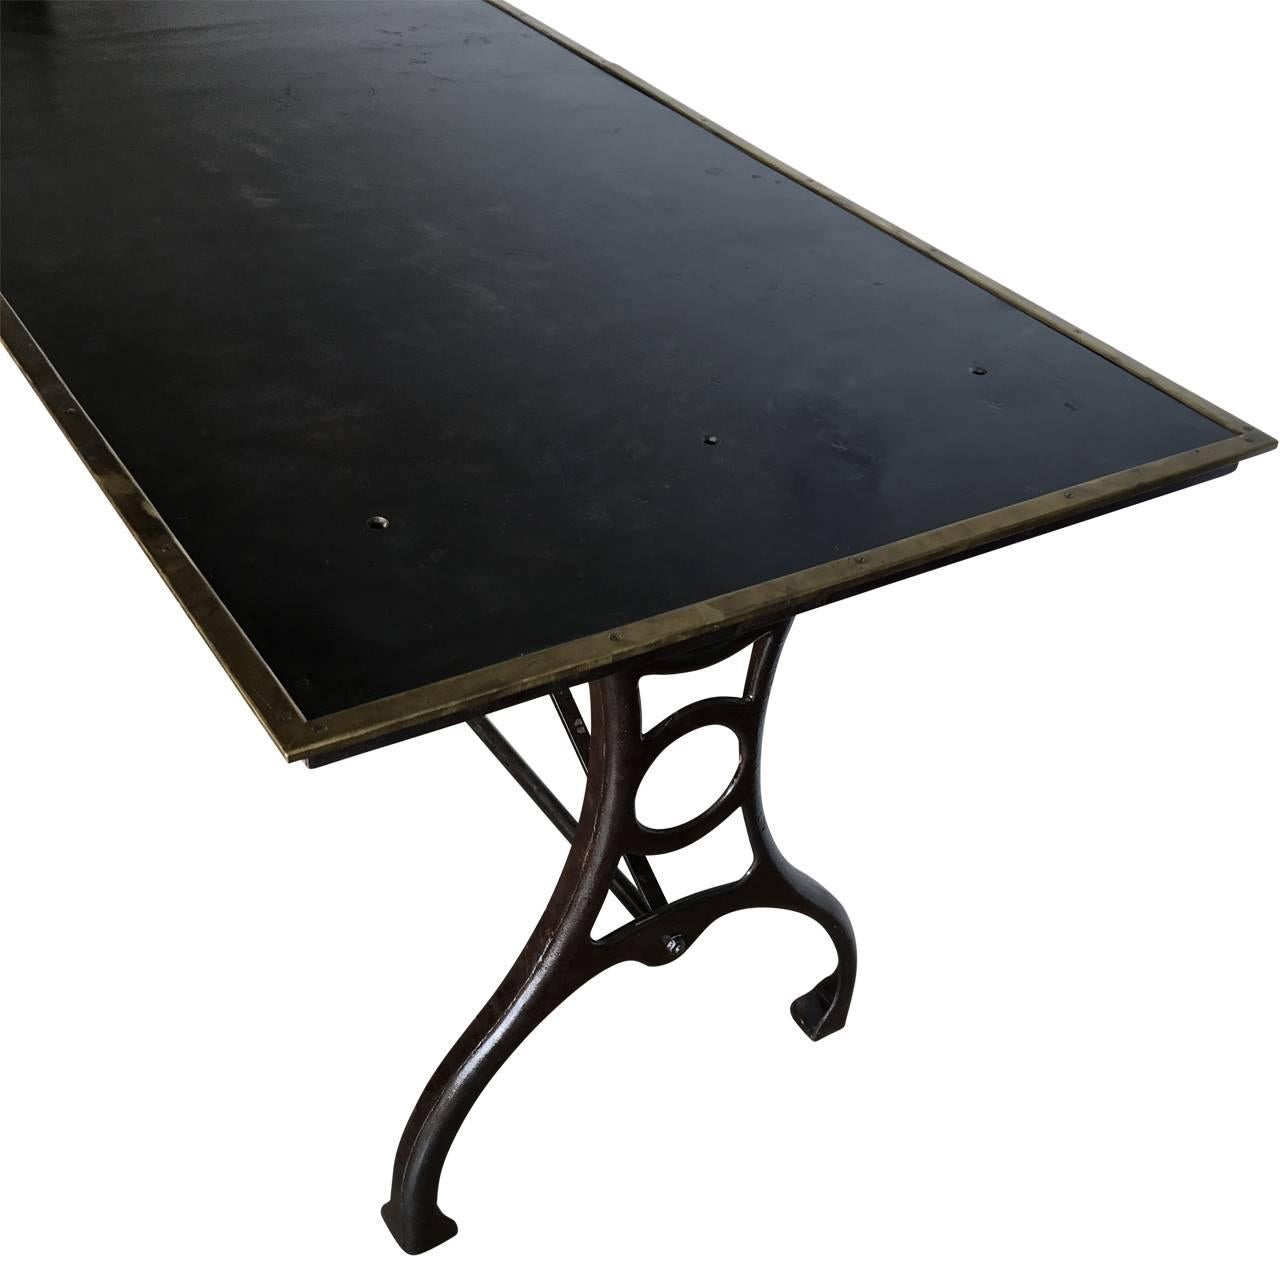 American Early Industrial Table From The National Geographic Society